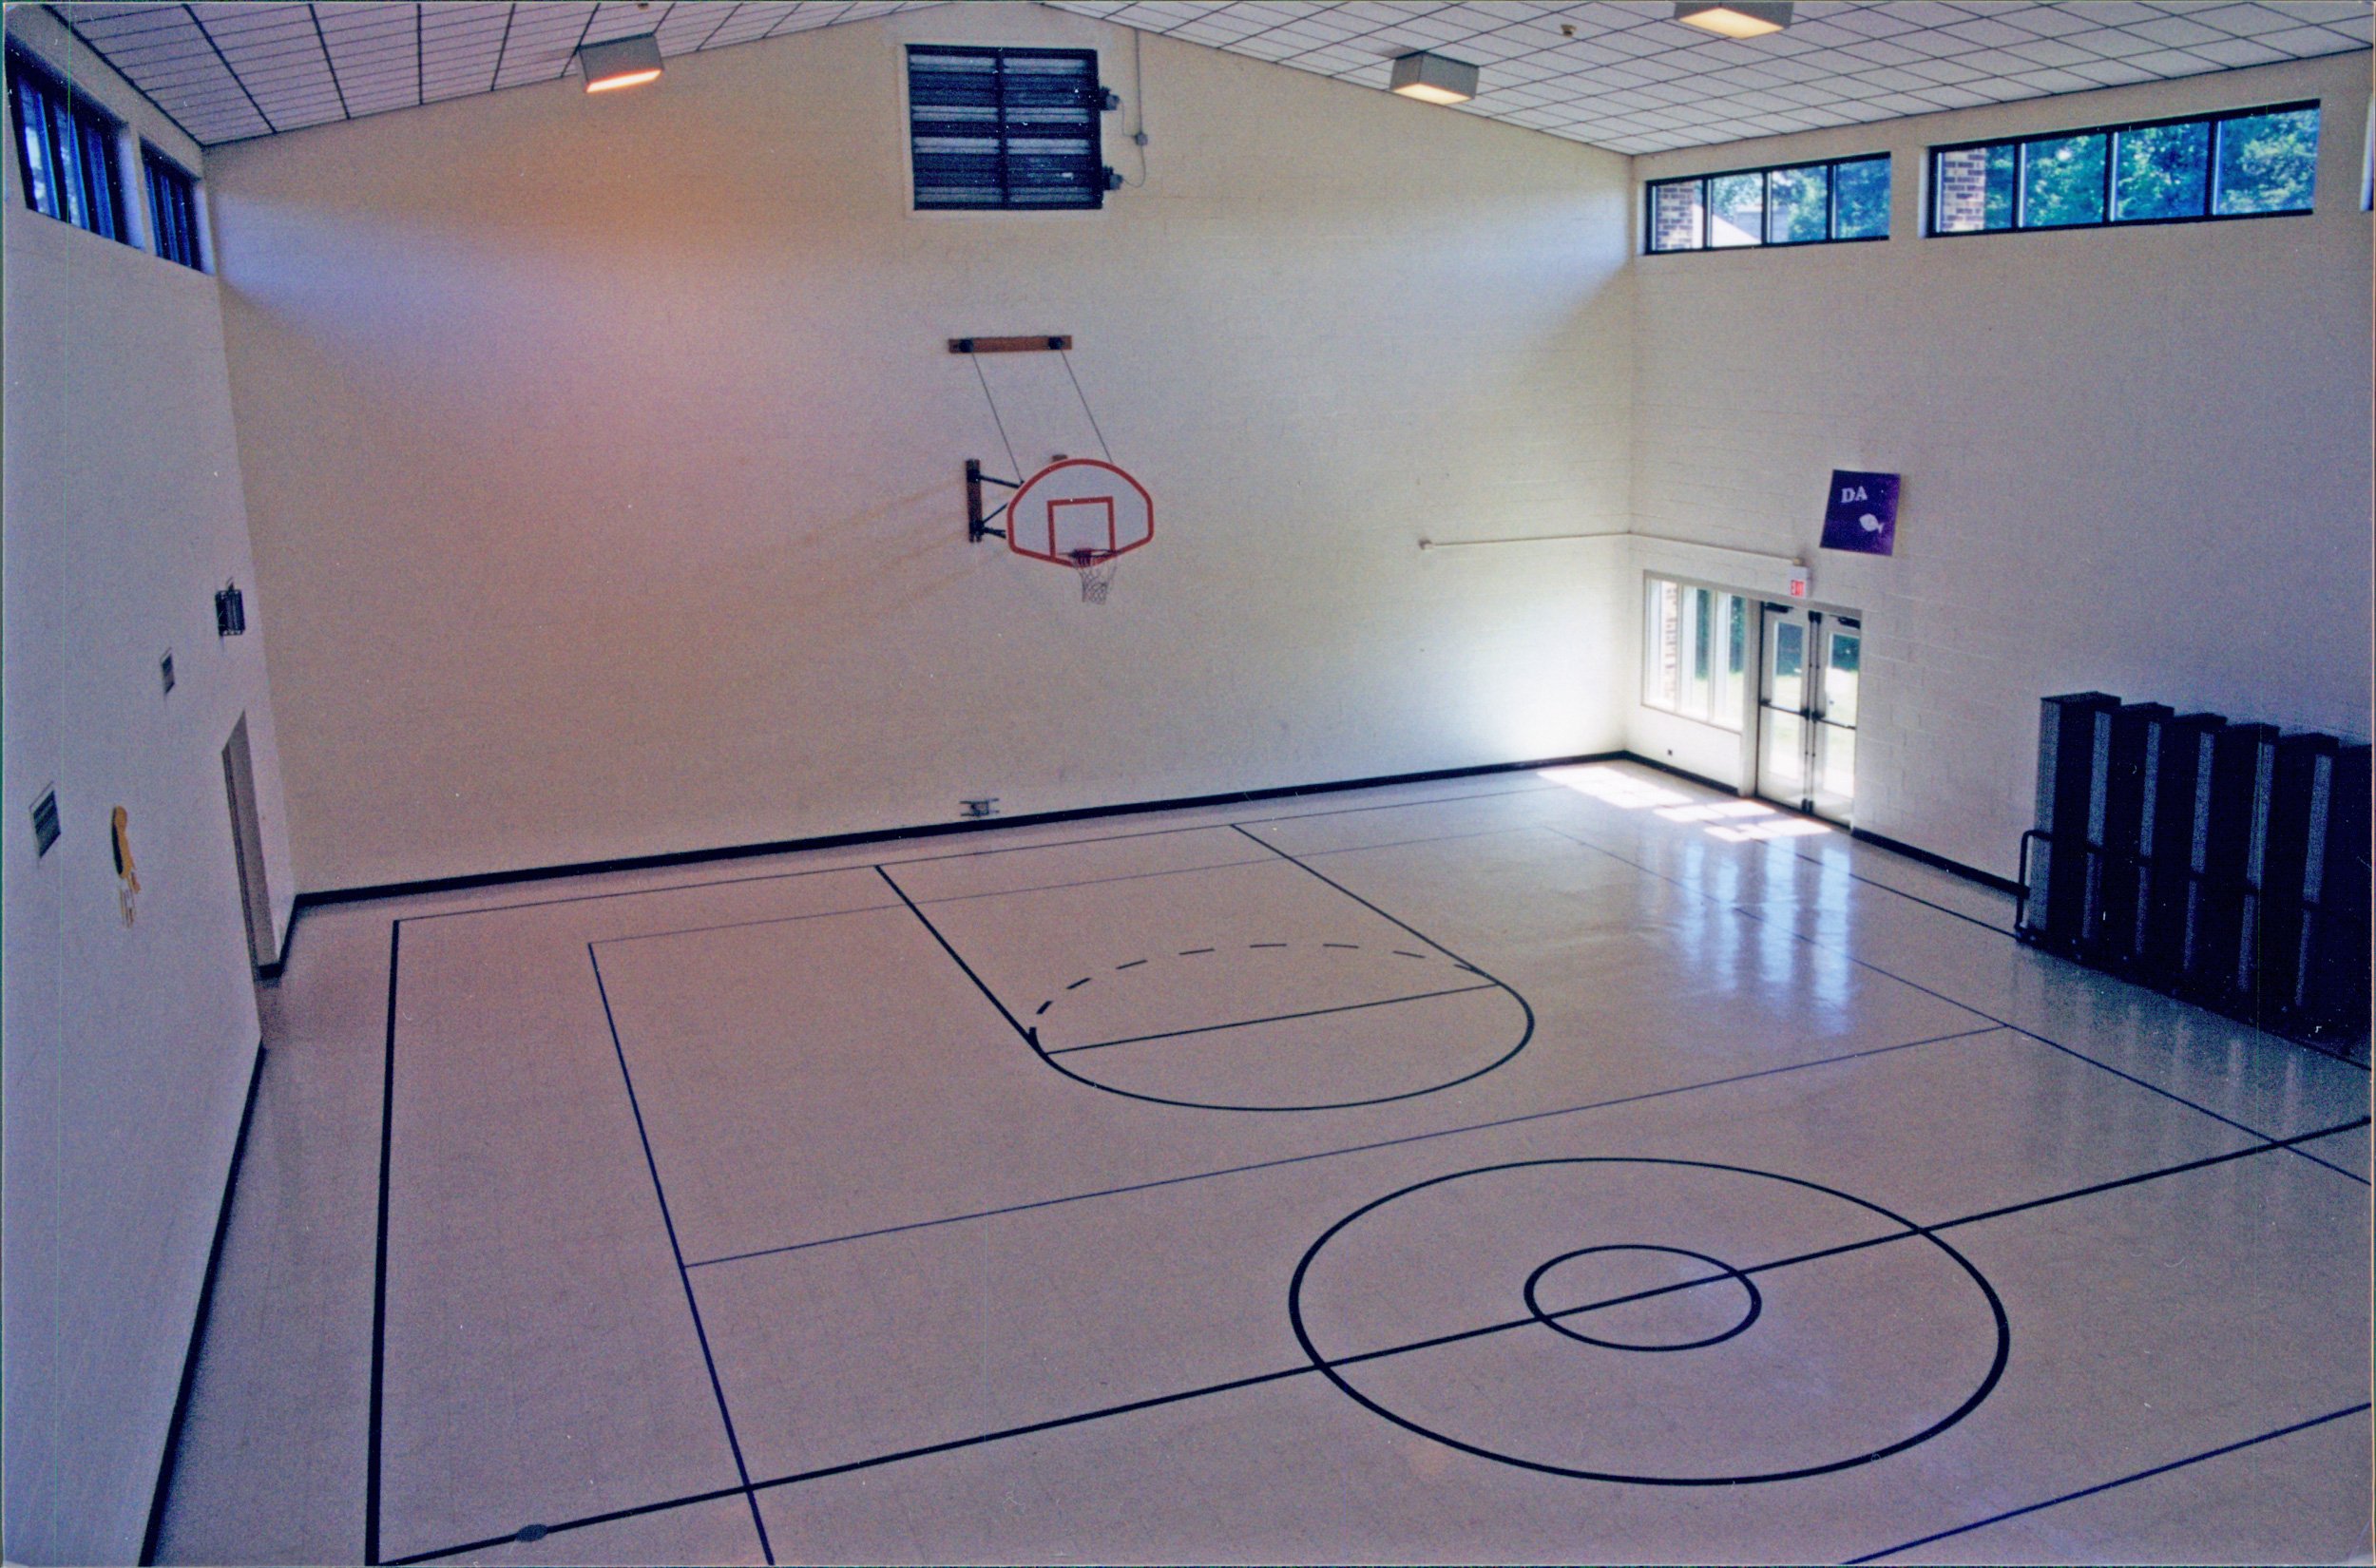 Open gym with six stored dividers on the side